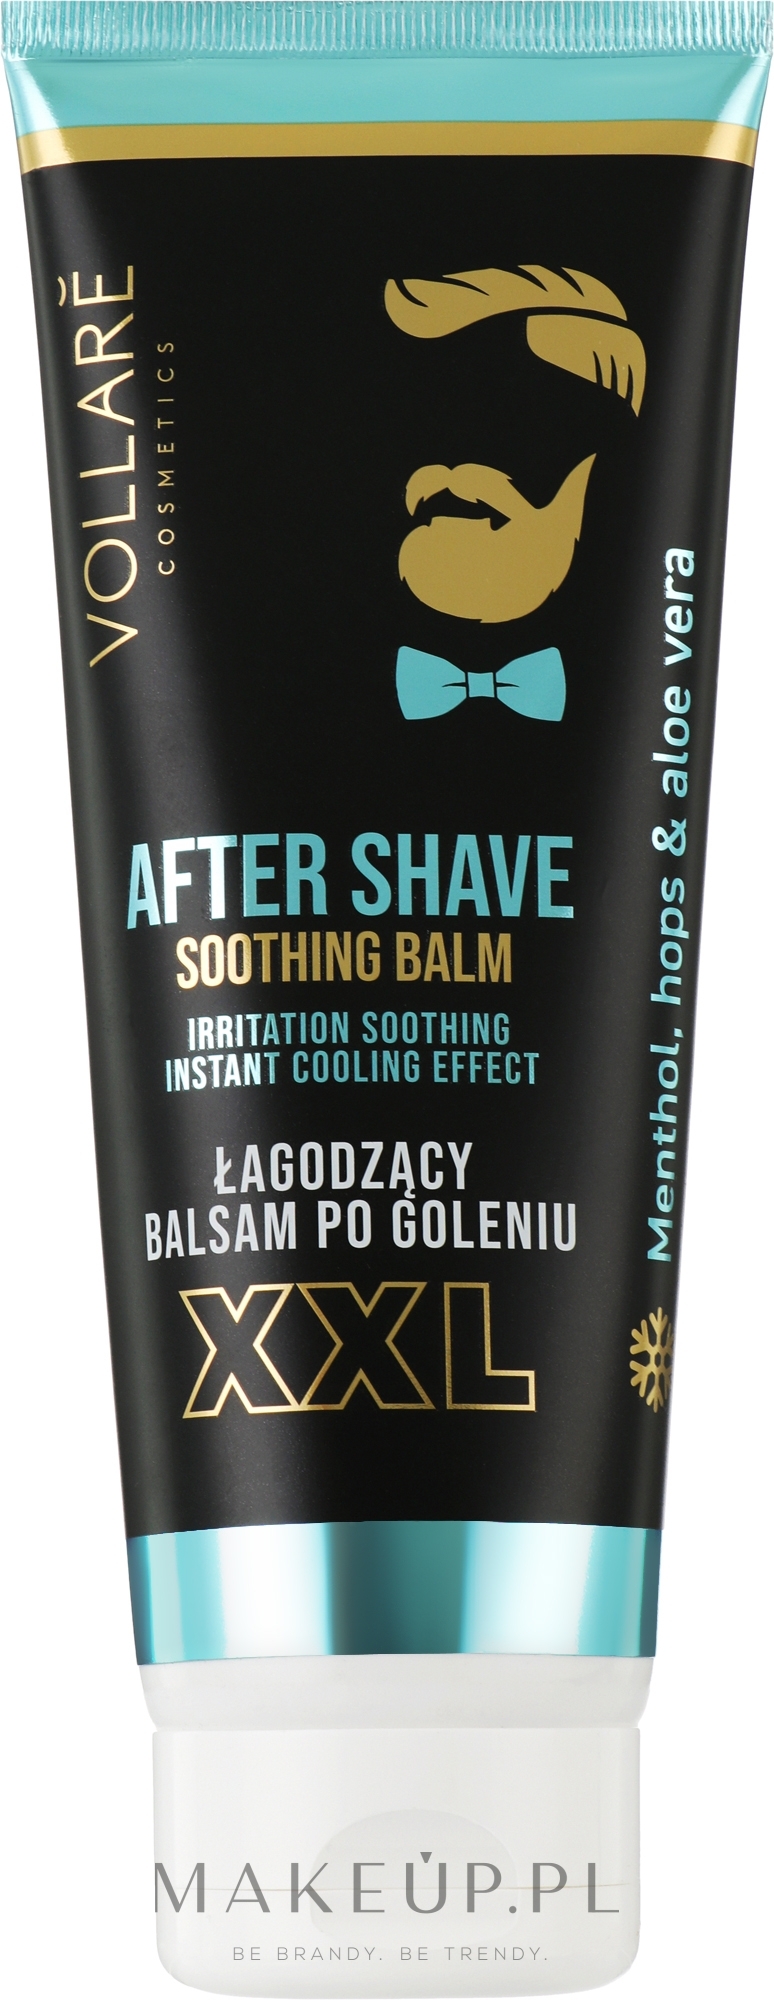 Balsam po goleniu - Vollare Men Soothing After Shave Balm — Zdjęcie 200 ml